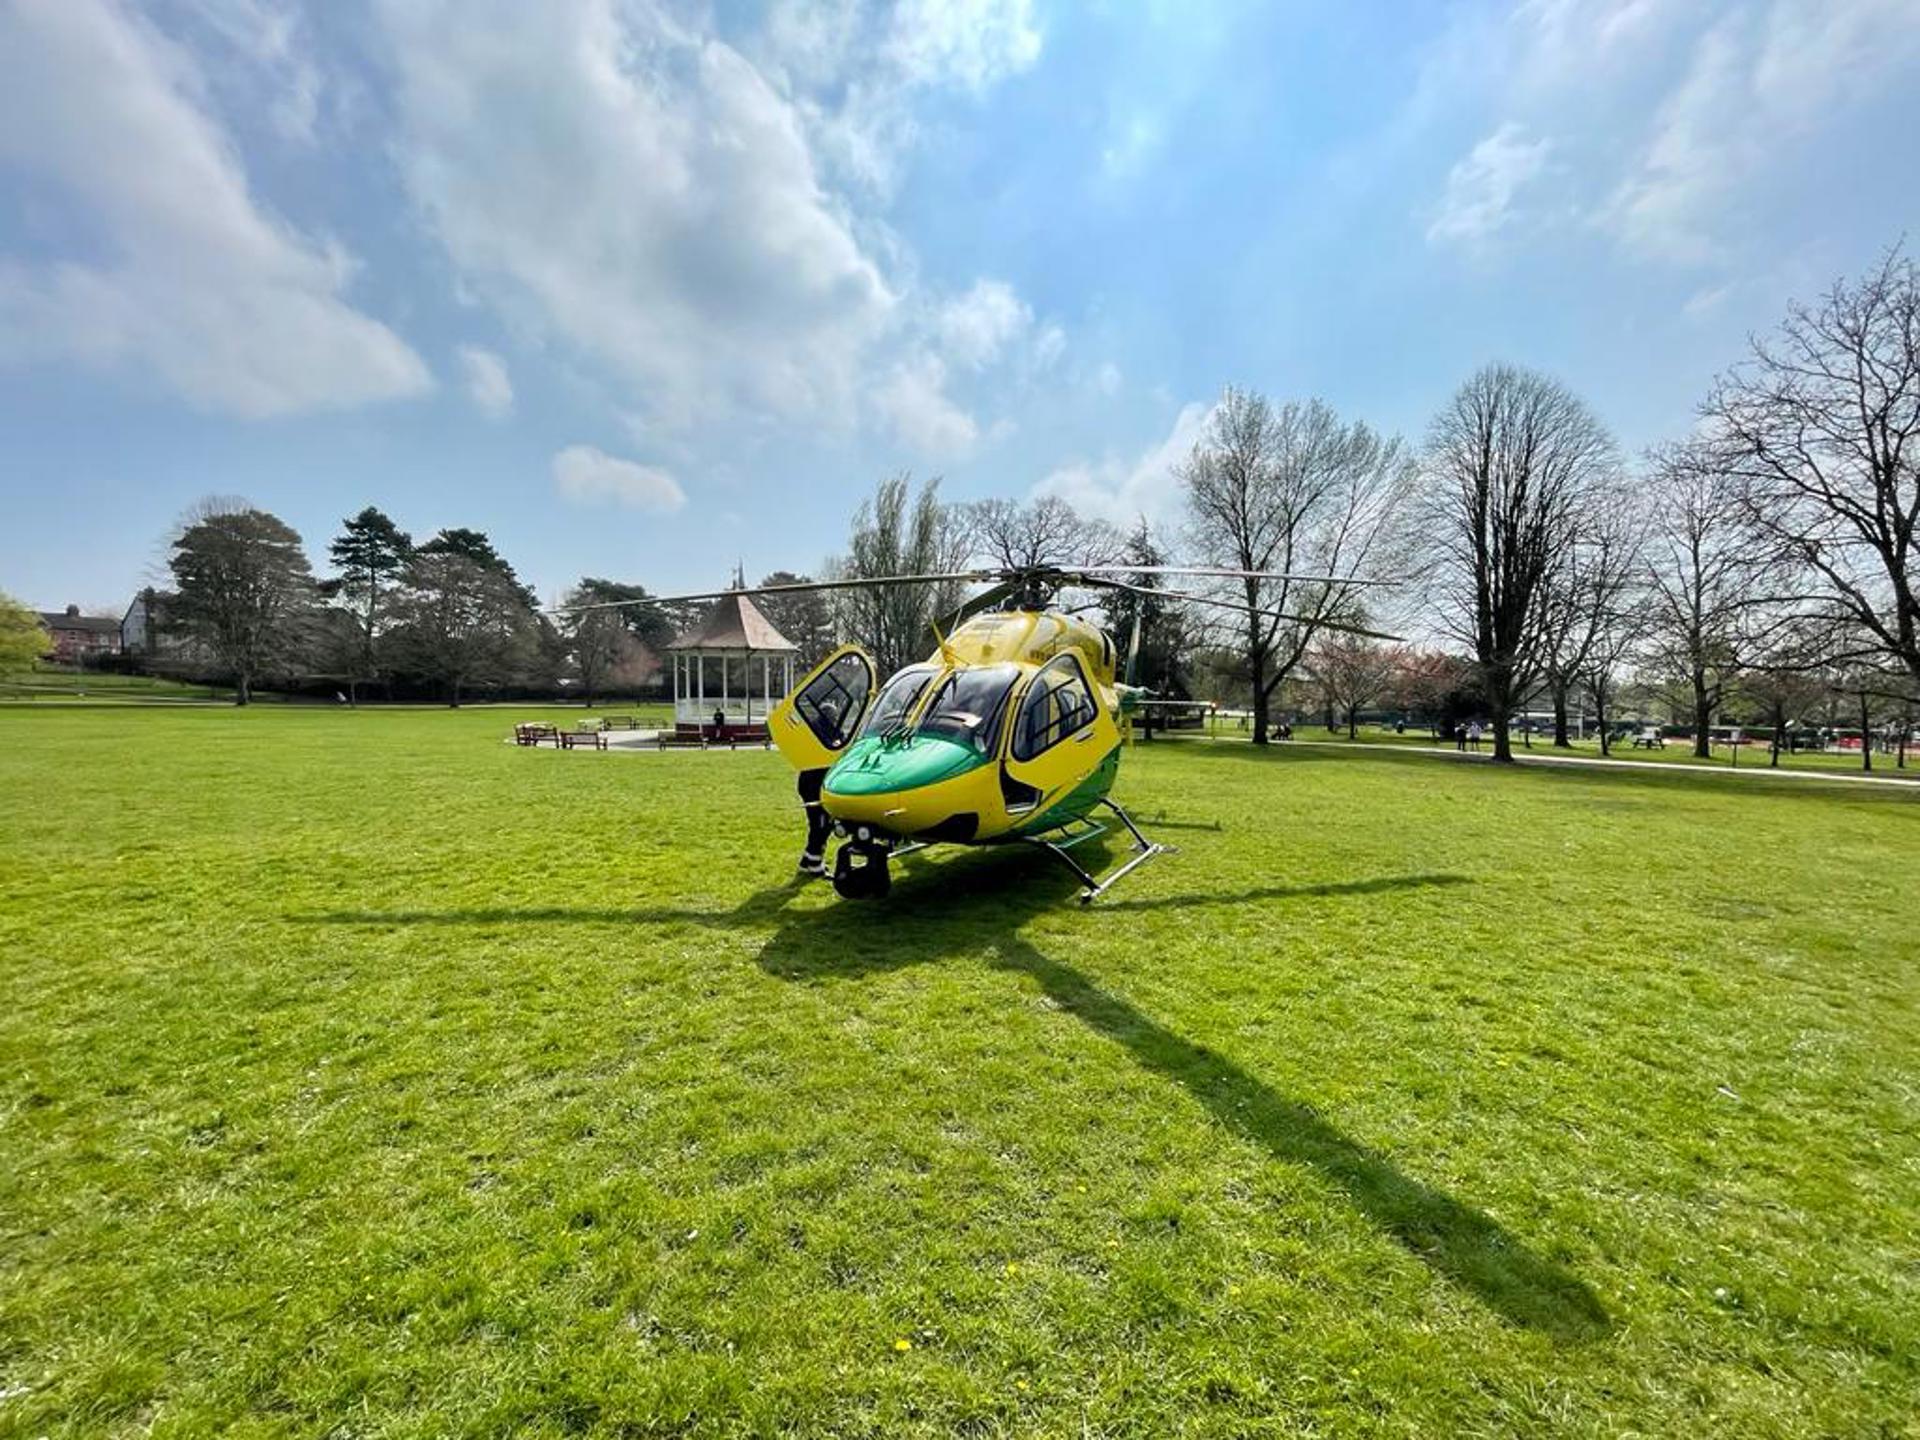 Wiltshire Air Ambulance's helicopter in John Coles Park, Chippenham